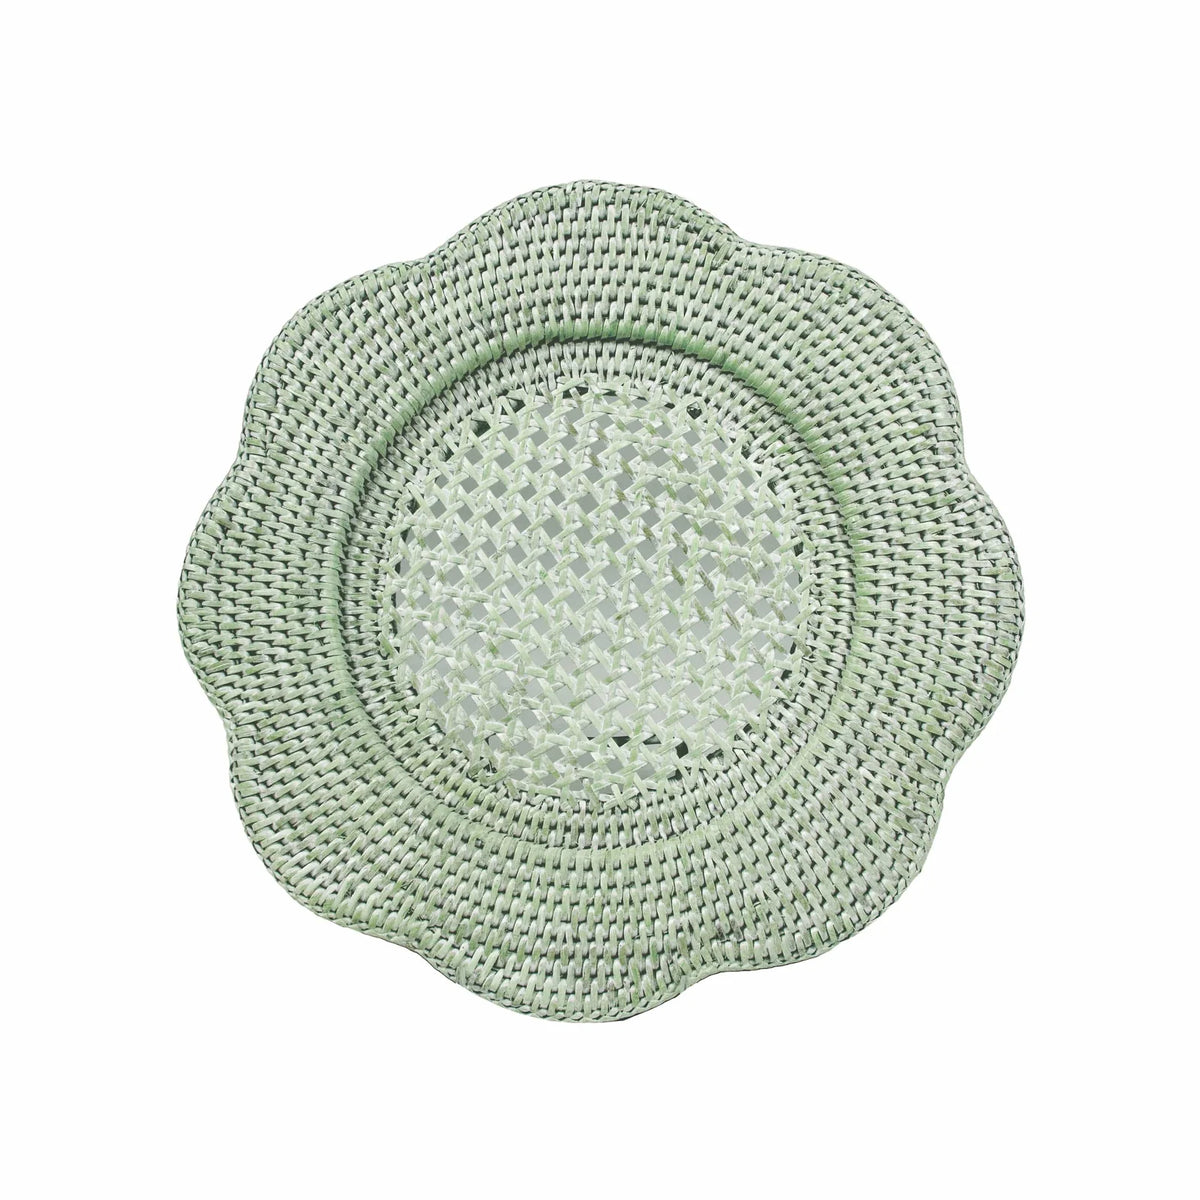 Rattan Scalloped Round Charger Plate in Green